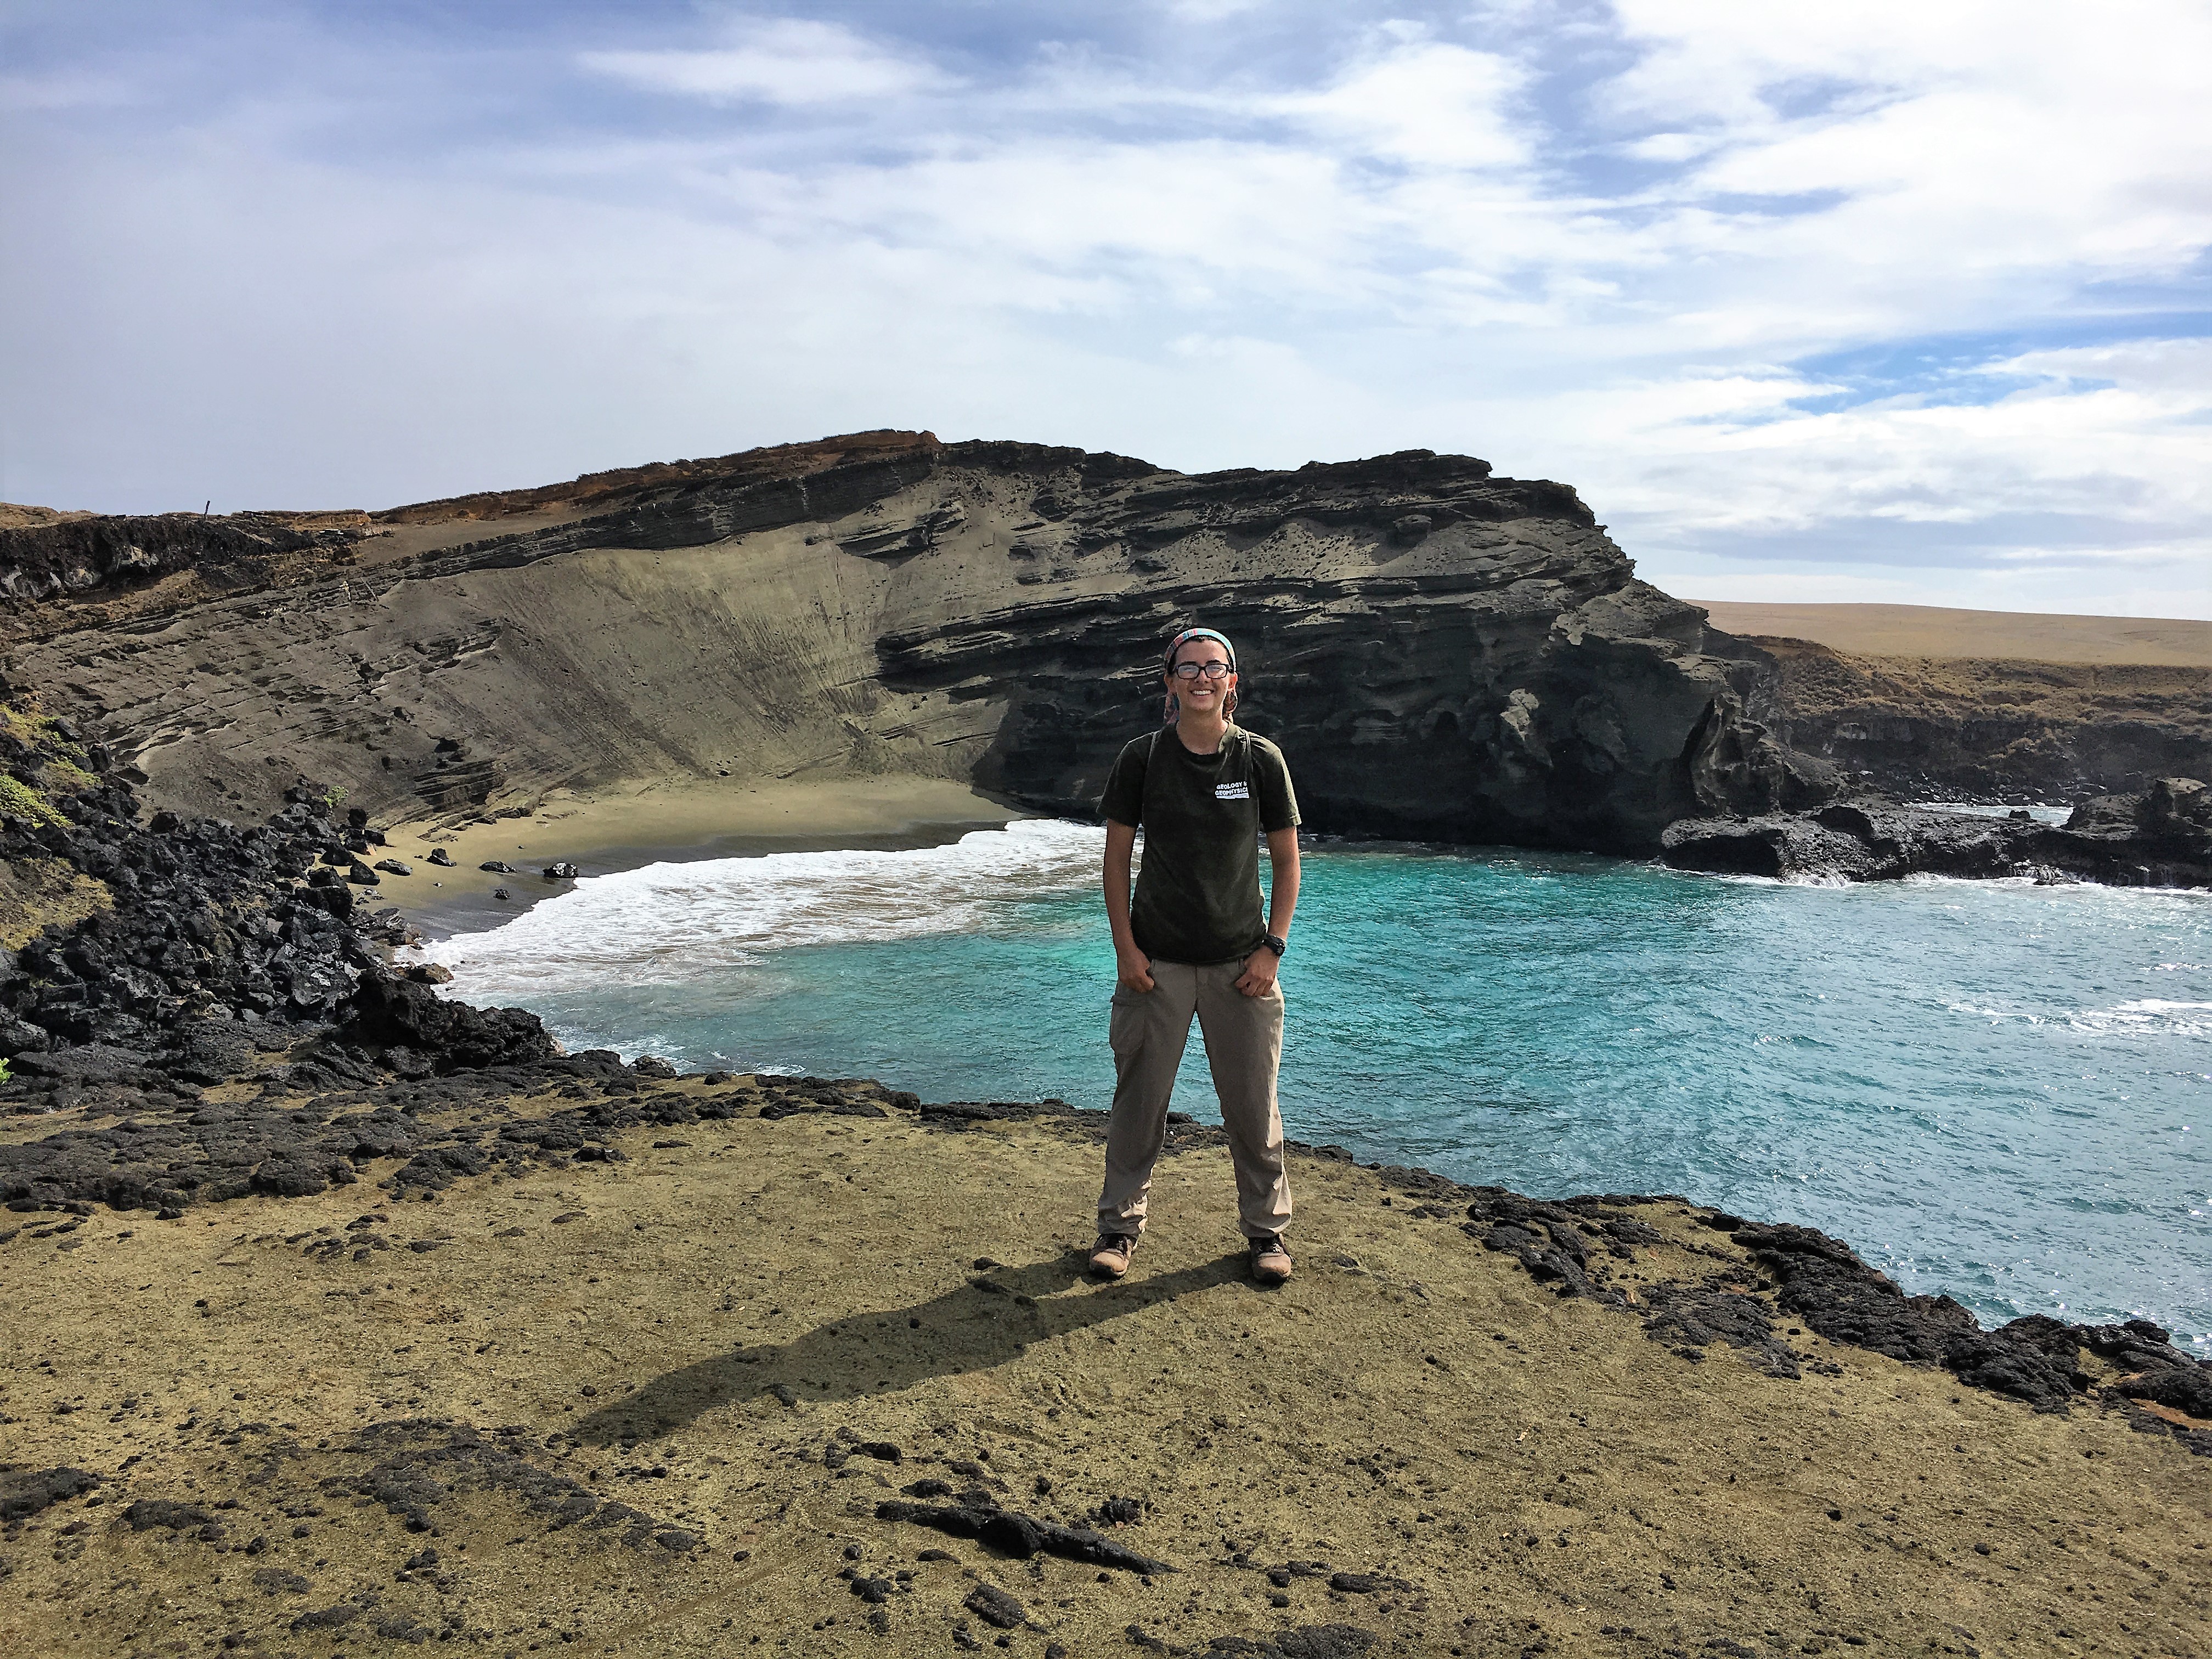 Jin-Si Over, 2015 Hollings Scholar alum, stands at one of her favorite beaches in Hawaii - the green sand beach at Papakolea. Her internship in Summer 2016 focused on shoreline change in Hawaii.